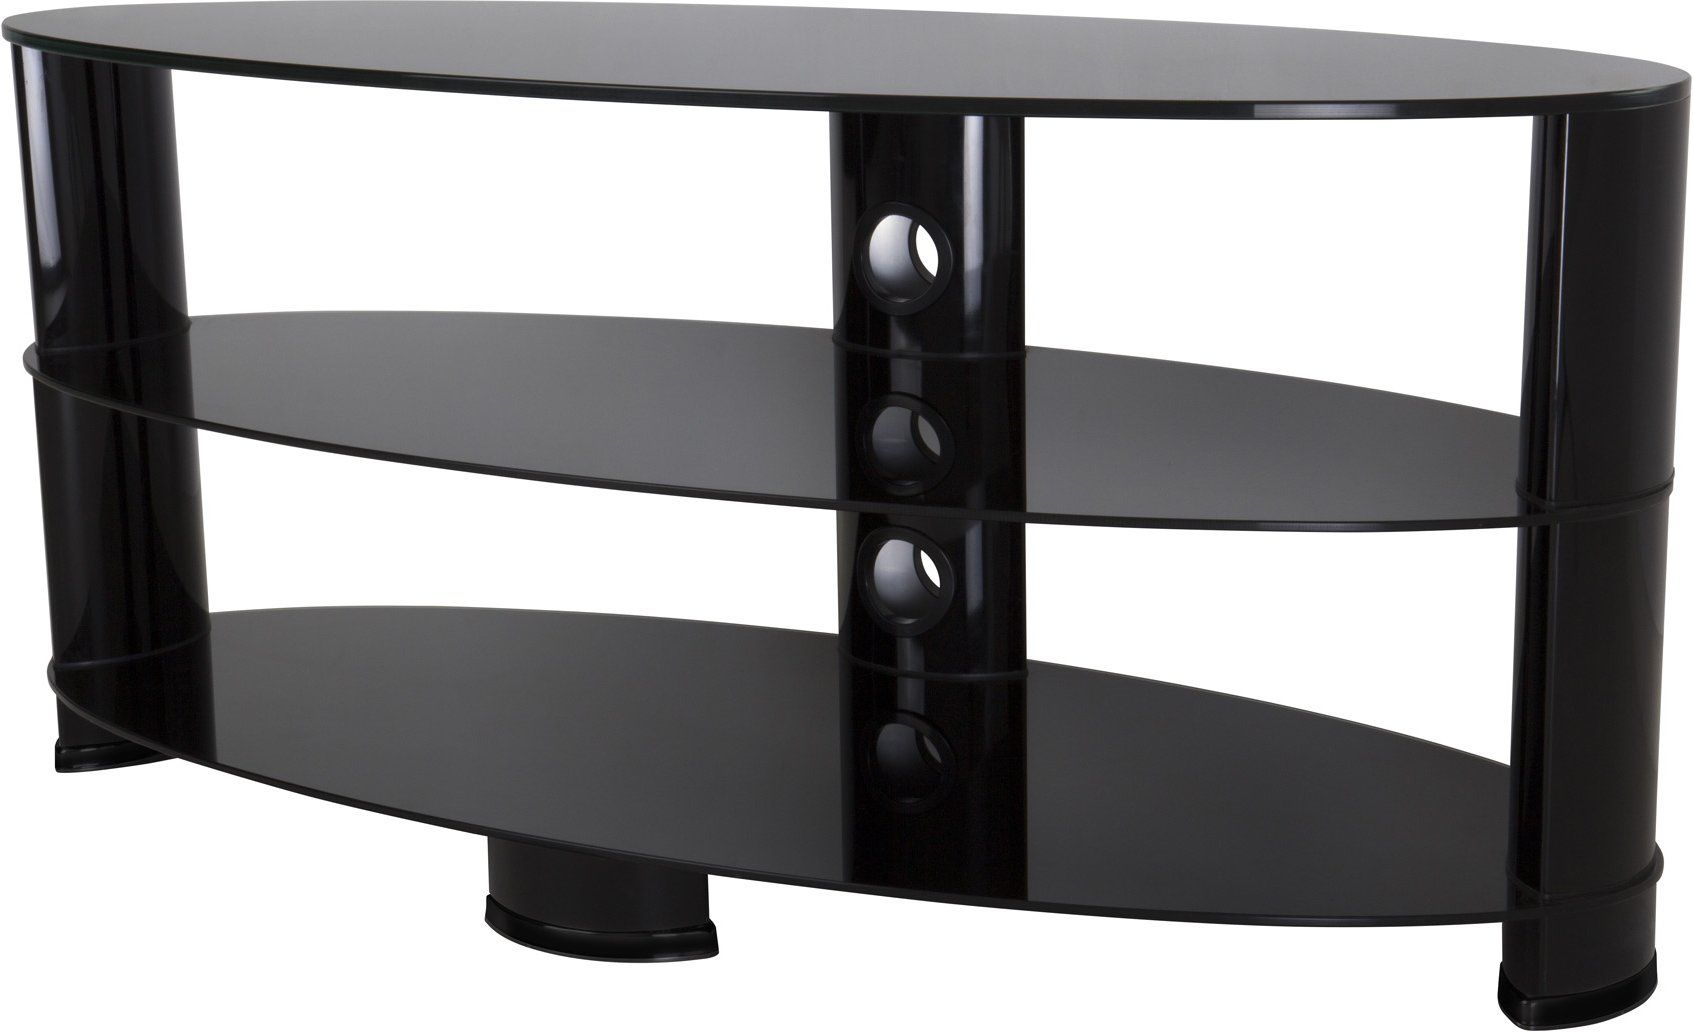 Avf Ovl1200bb Oval Glass Tv Stand For Tvs Up To 55 Inch With Regard To Glass Shelves Tv Stands For Tvs Up To 60" (View 8 of 15)